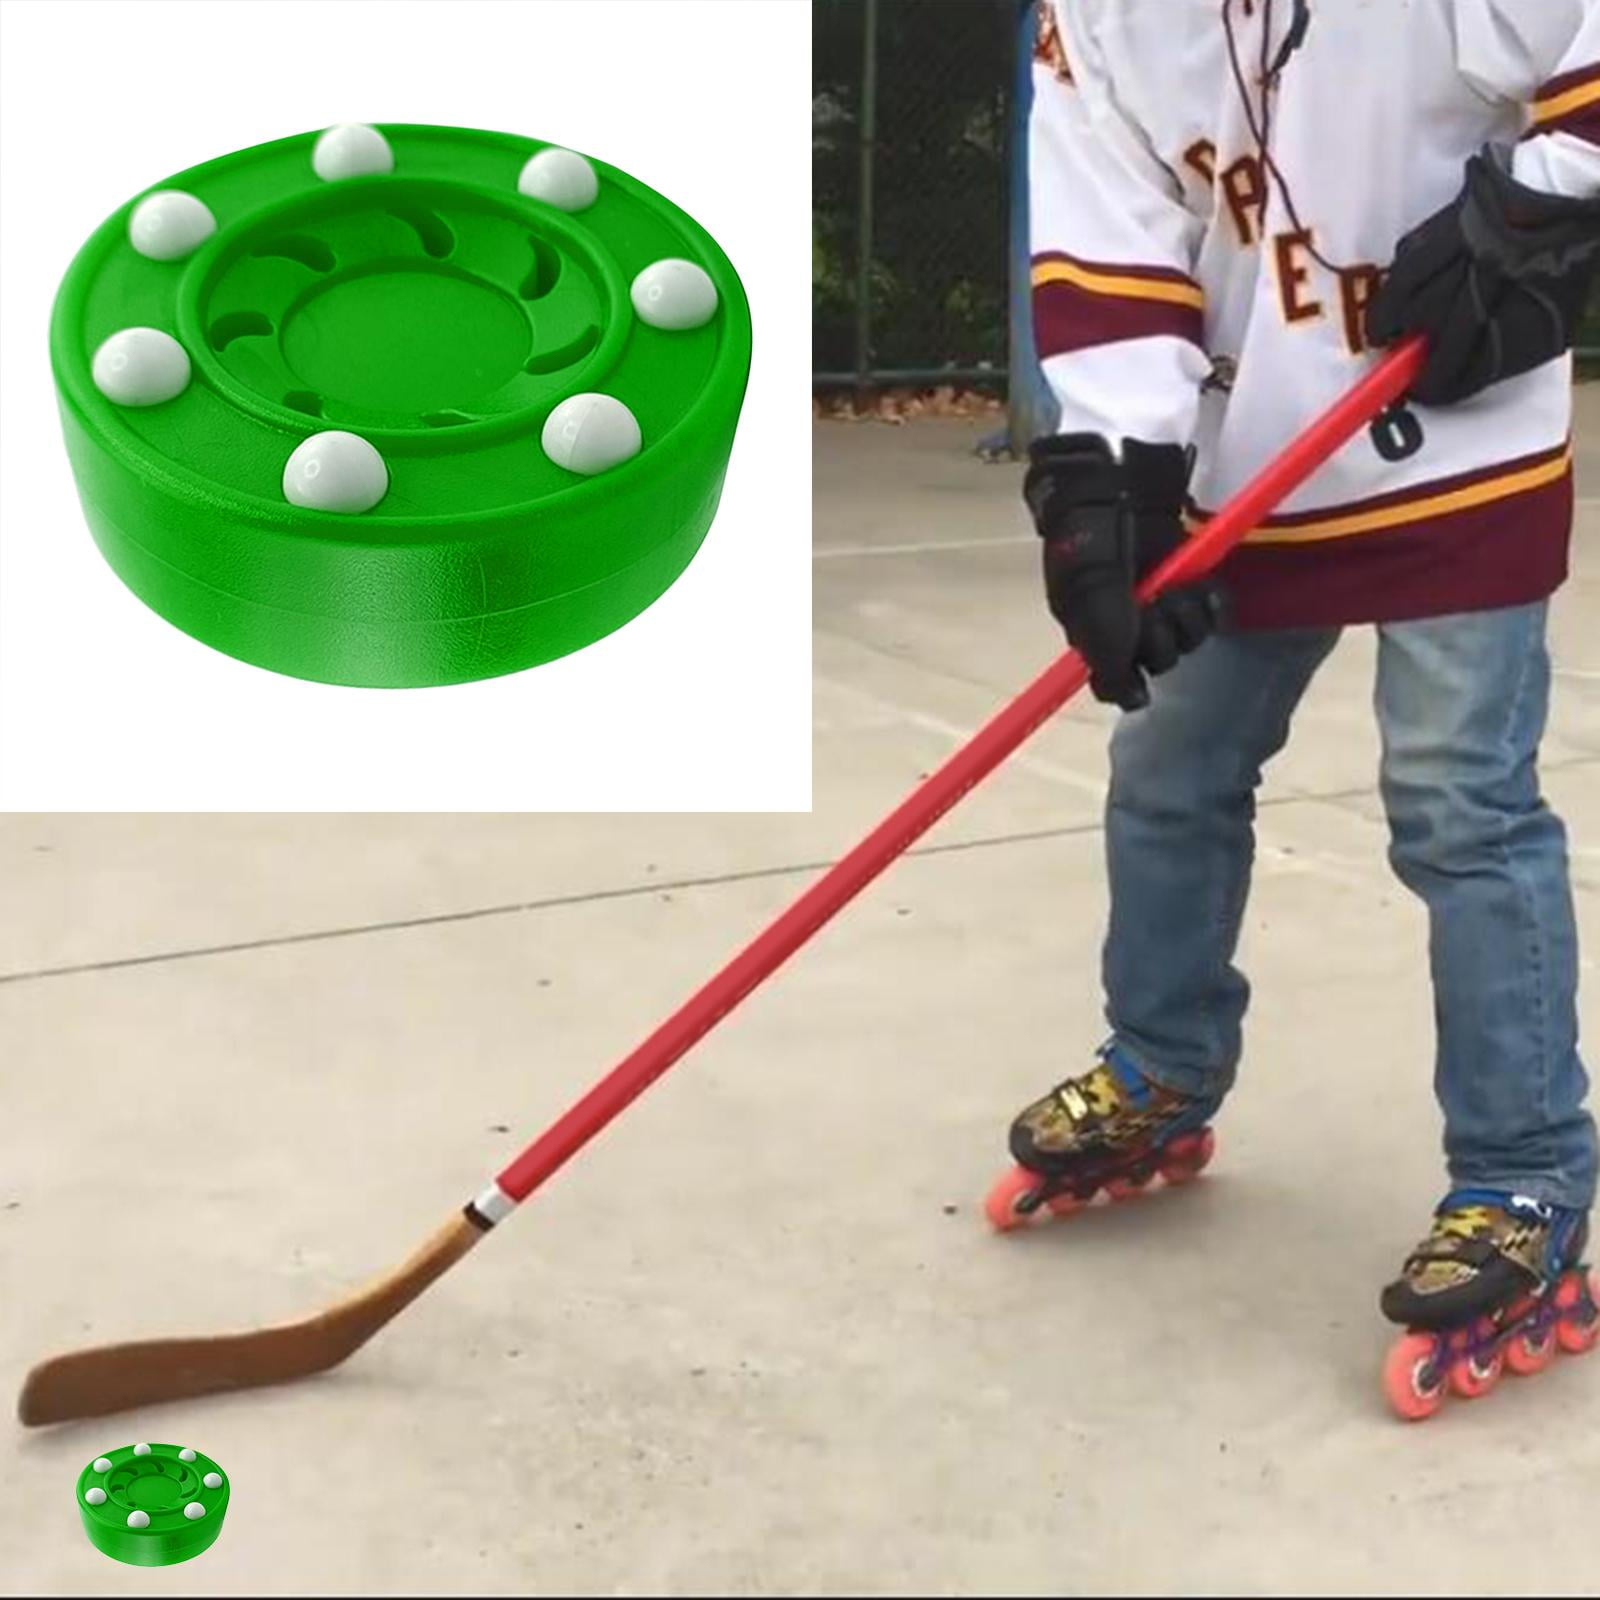 reaction time and coordination puck control My Passer training aid for stickhandling 